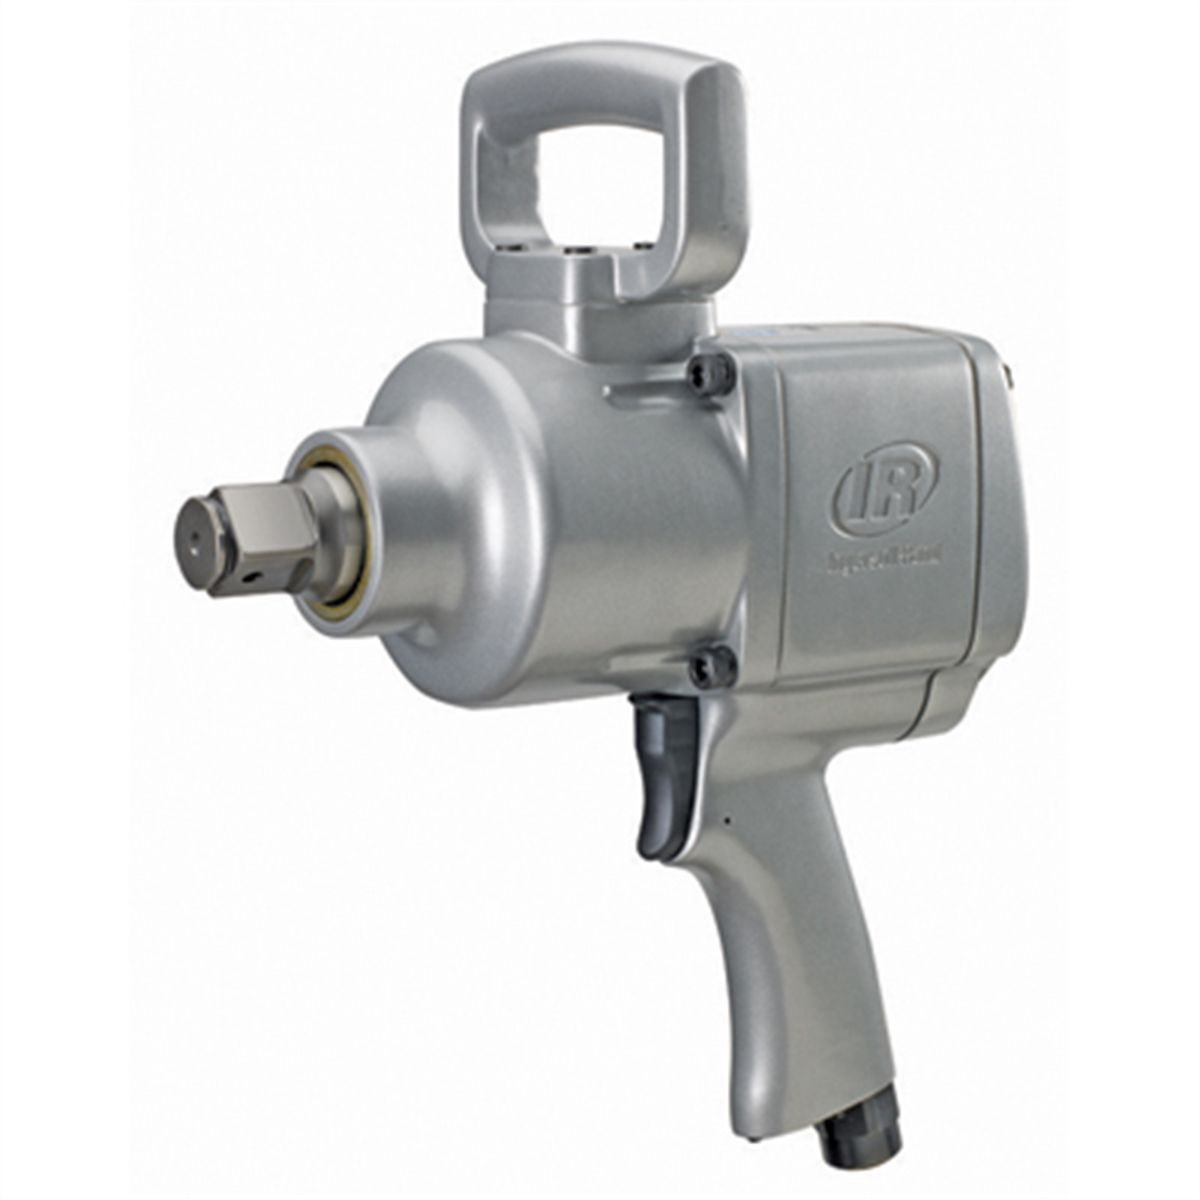 1 Inch Drive Heavy Duty Air Impact Wrench IRT295 1...